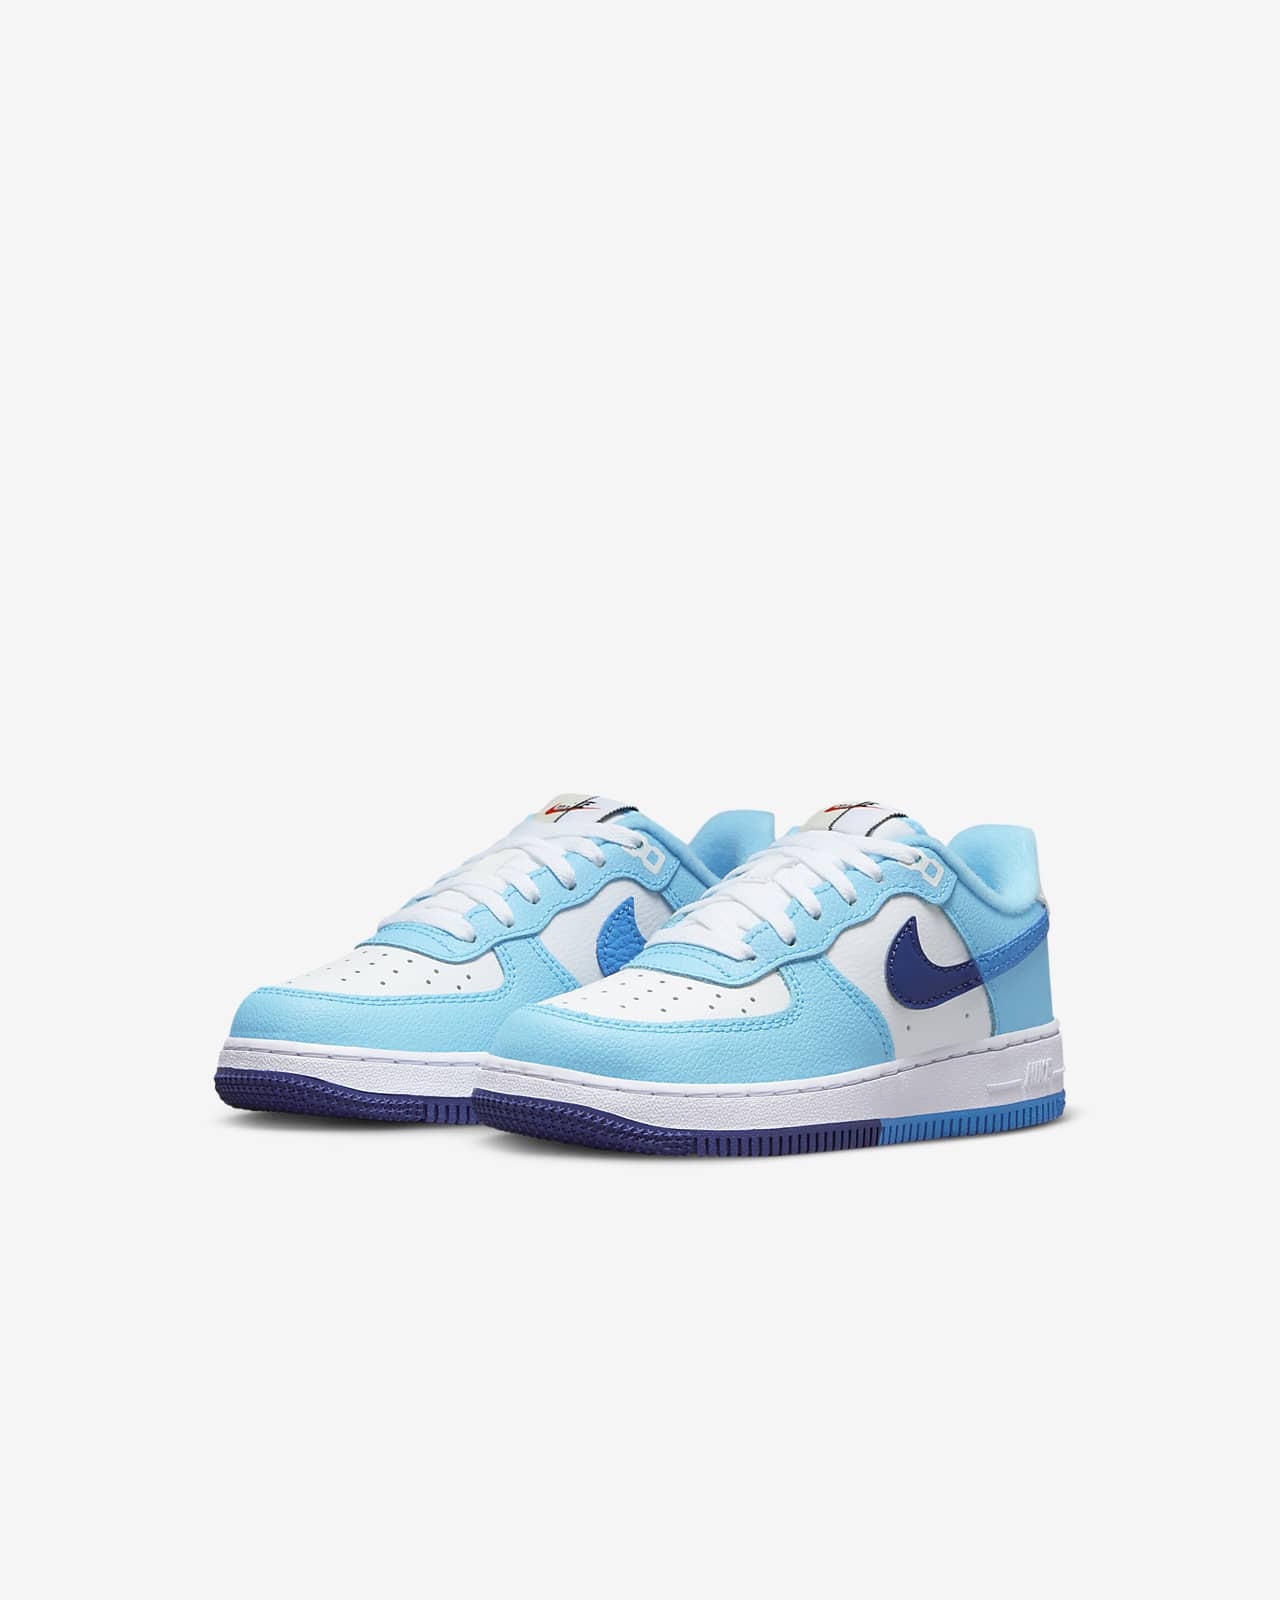 NIKE AIR FORCE 1 LOW 82 WHITE/BLUE - SNEAKERS CHILDREN